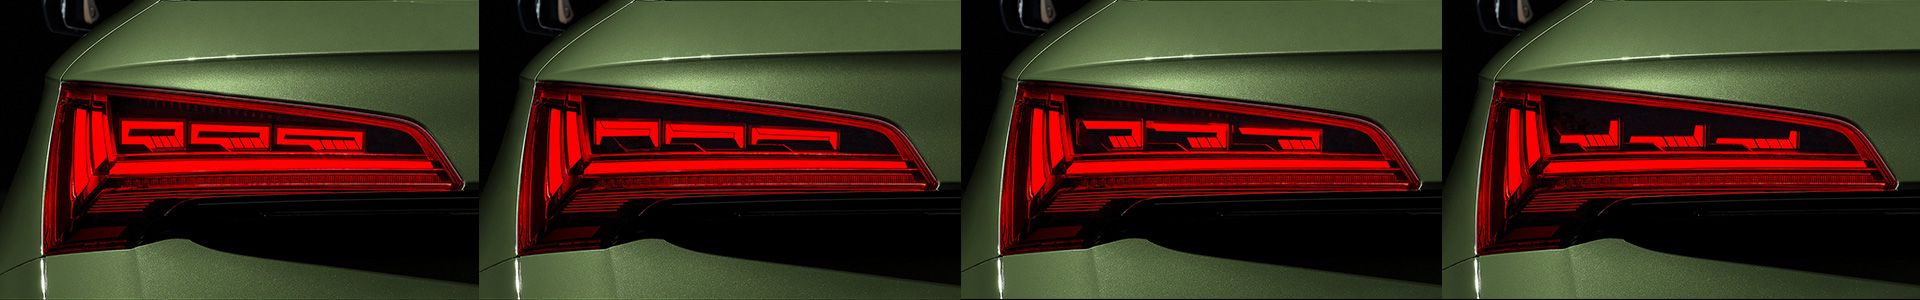 The Audi Q5 with digital OLED rear lights